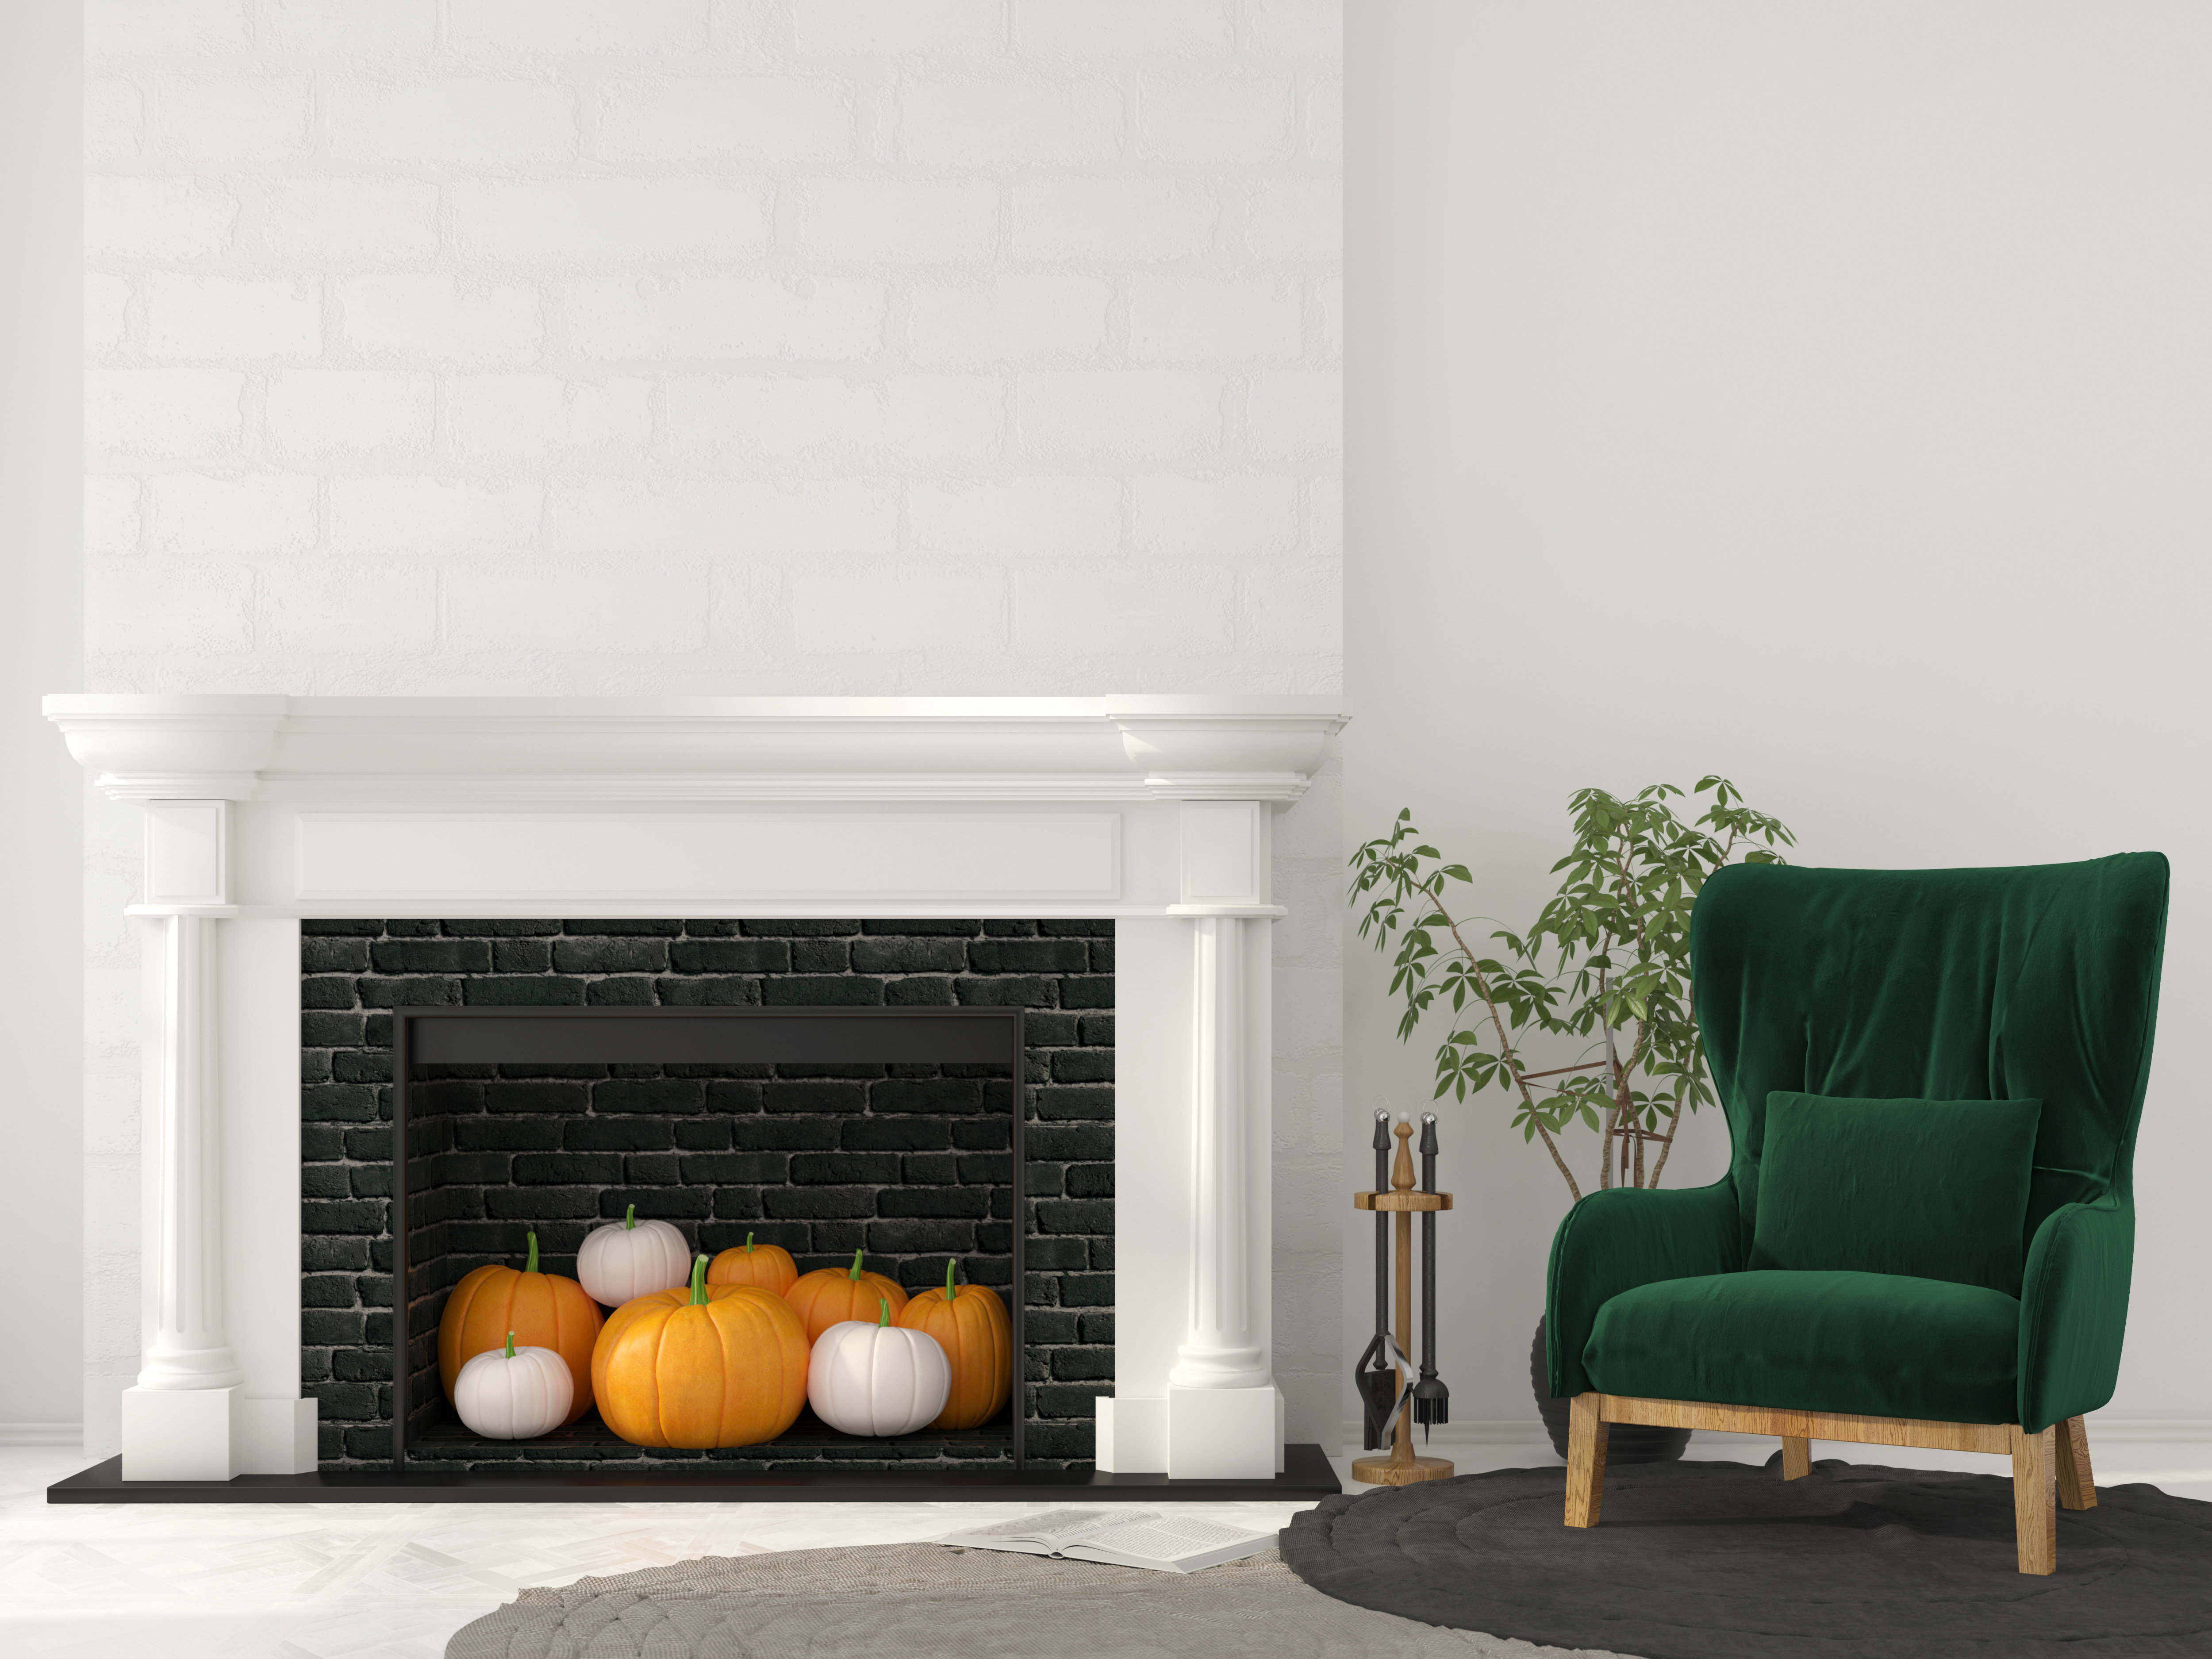 Interior decoration for Halloween. Classic fireplace with pumpkins inside and green armchair